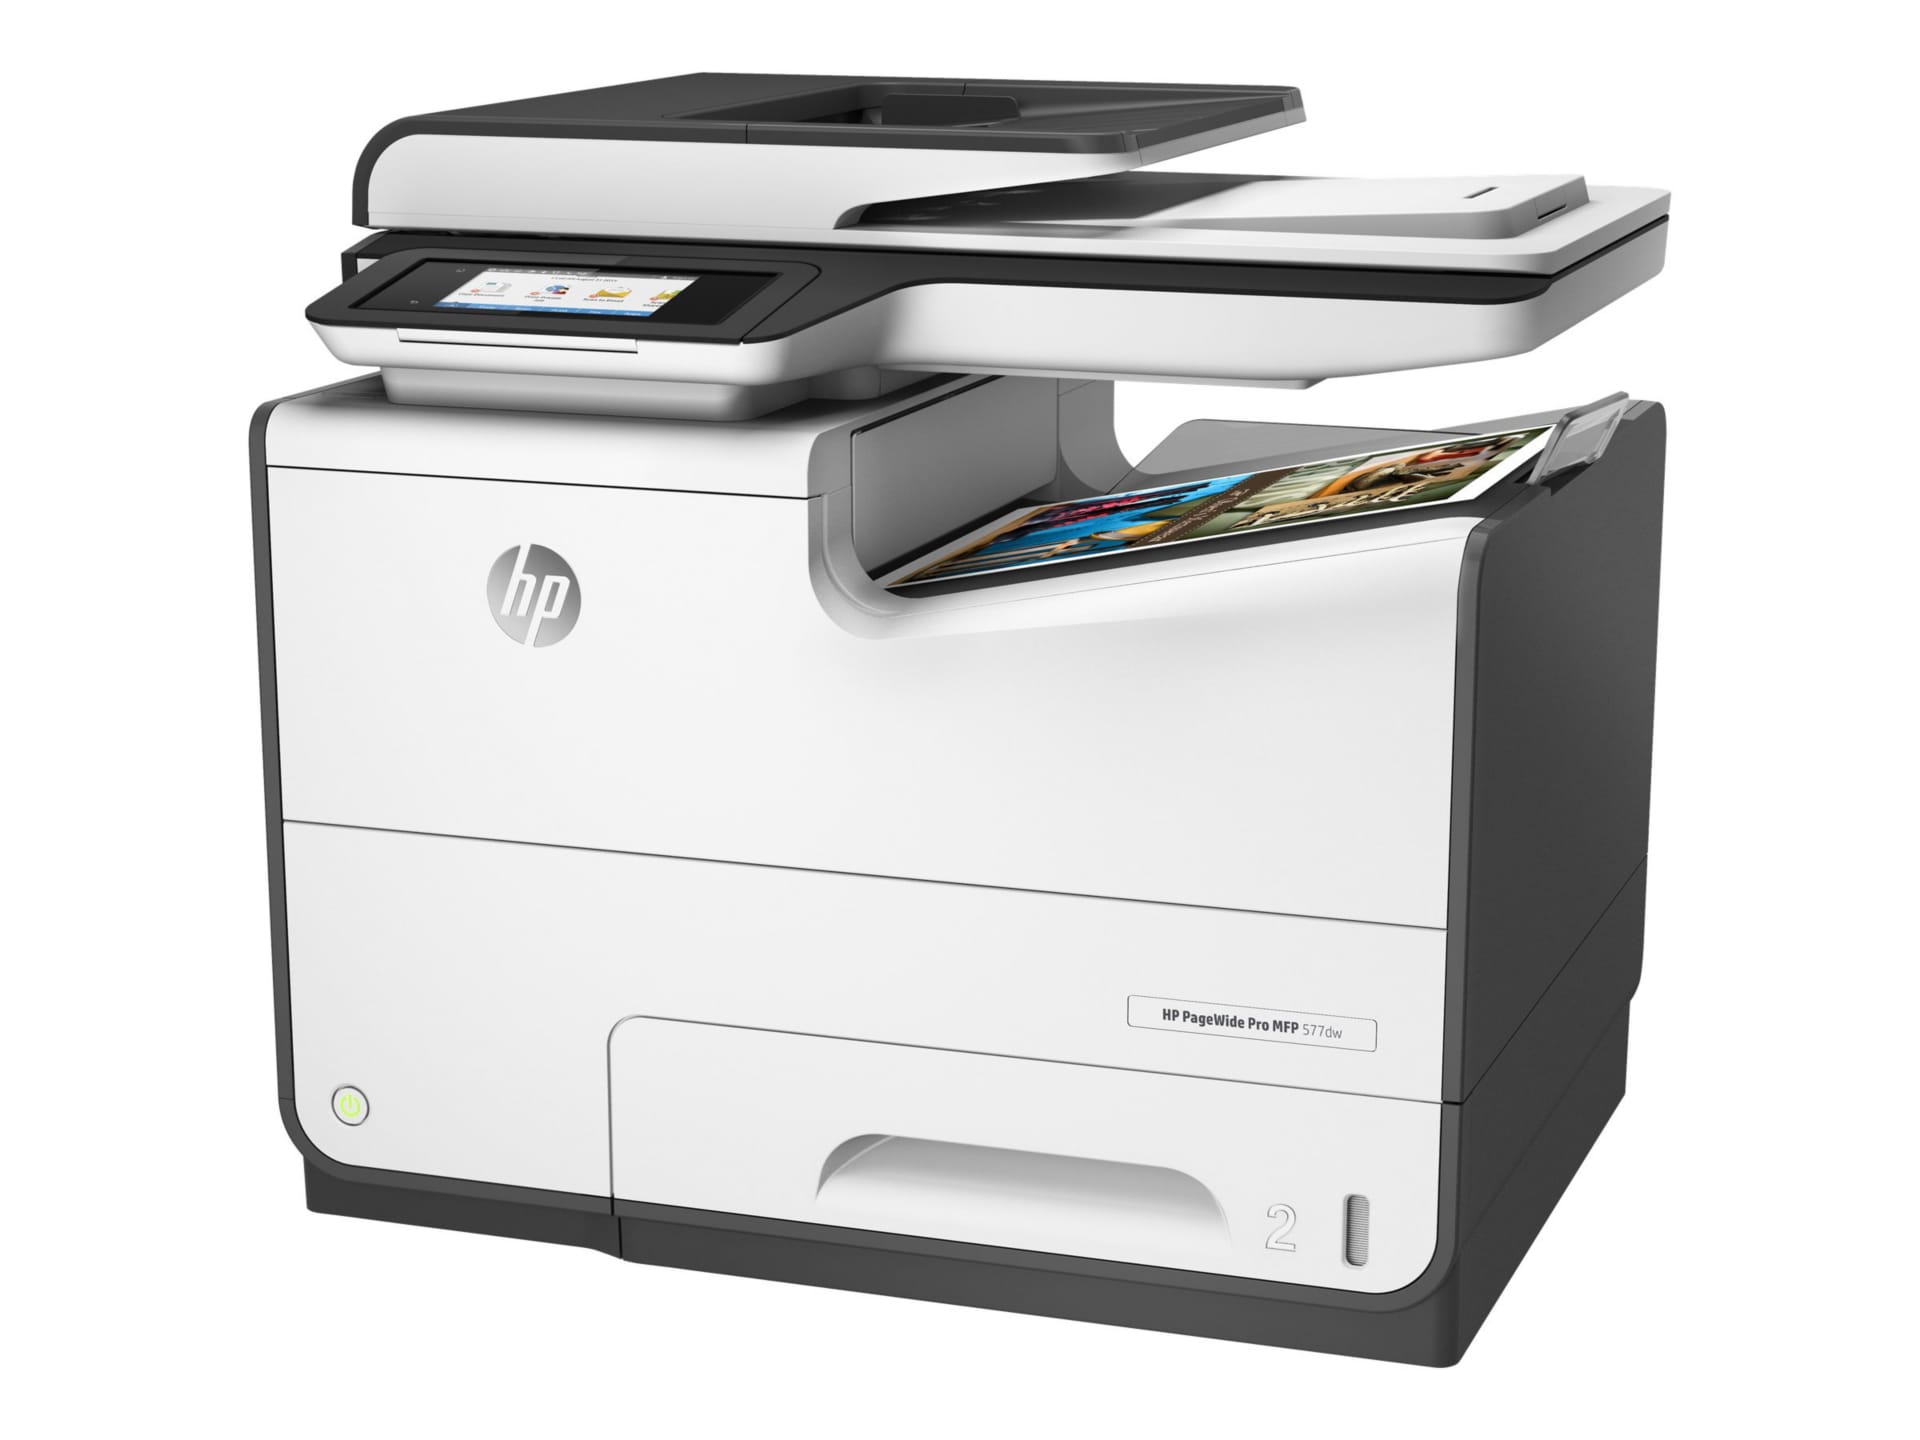 HP PageWide Pro 577dw Color